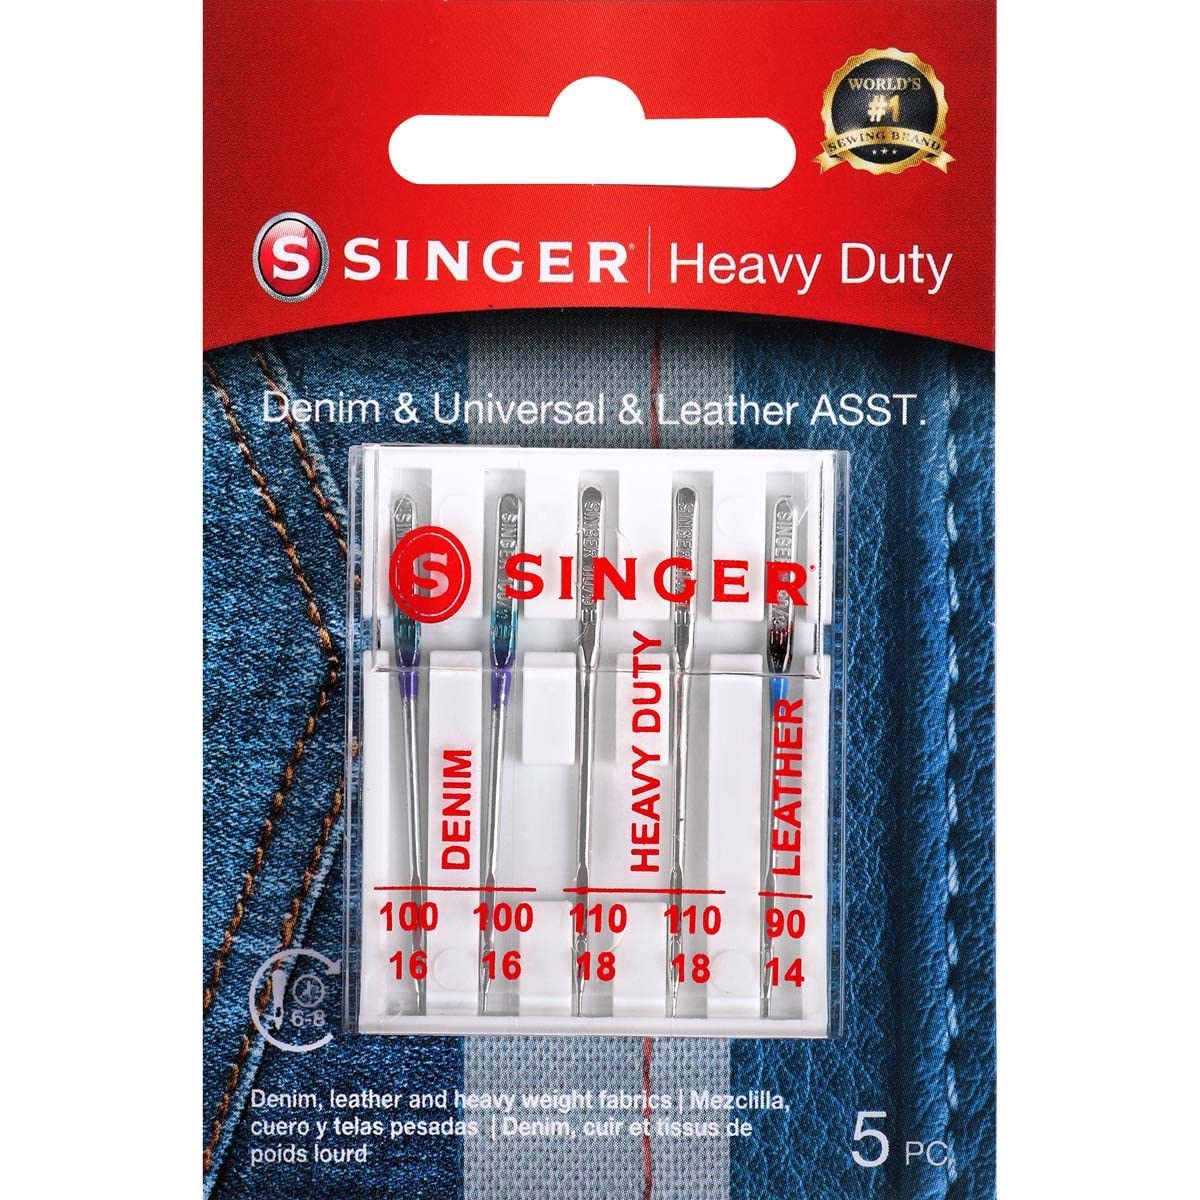 SINGER 04801 Universal Heavy Duty Sewing Machine Needles, 5-Count (Packaging May vary)